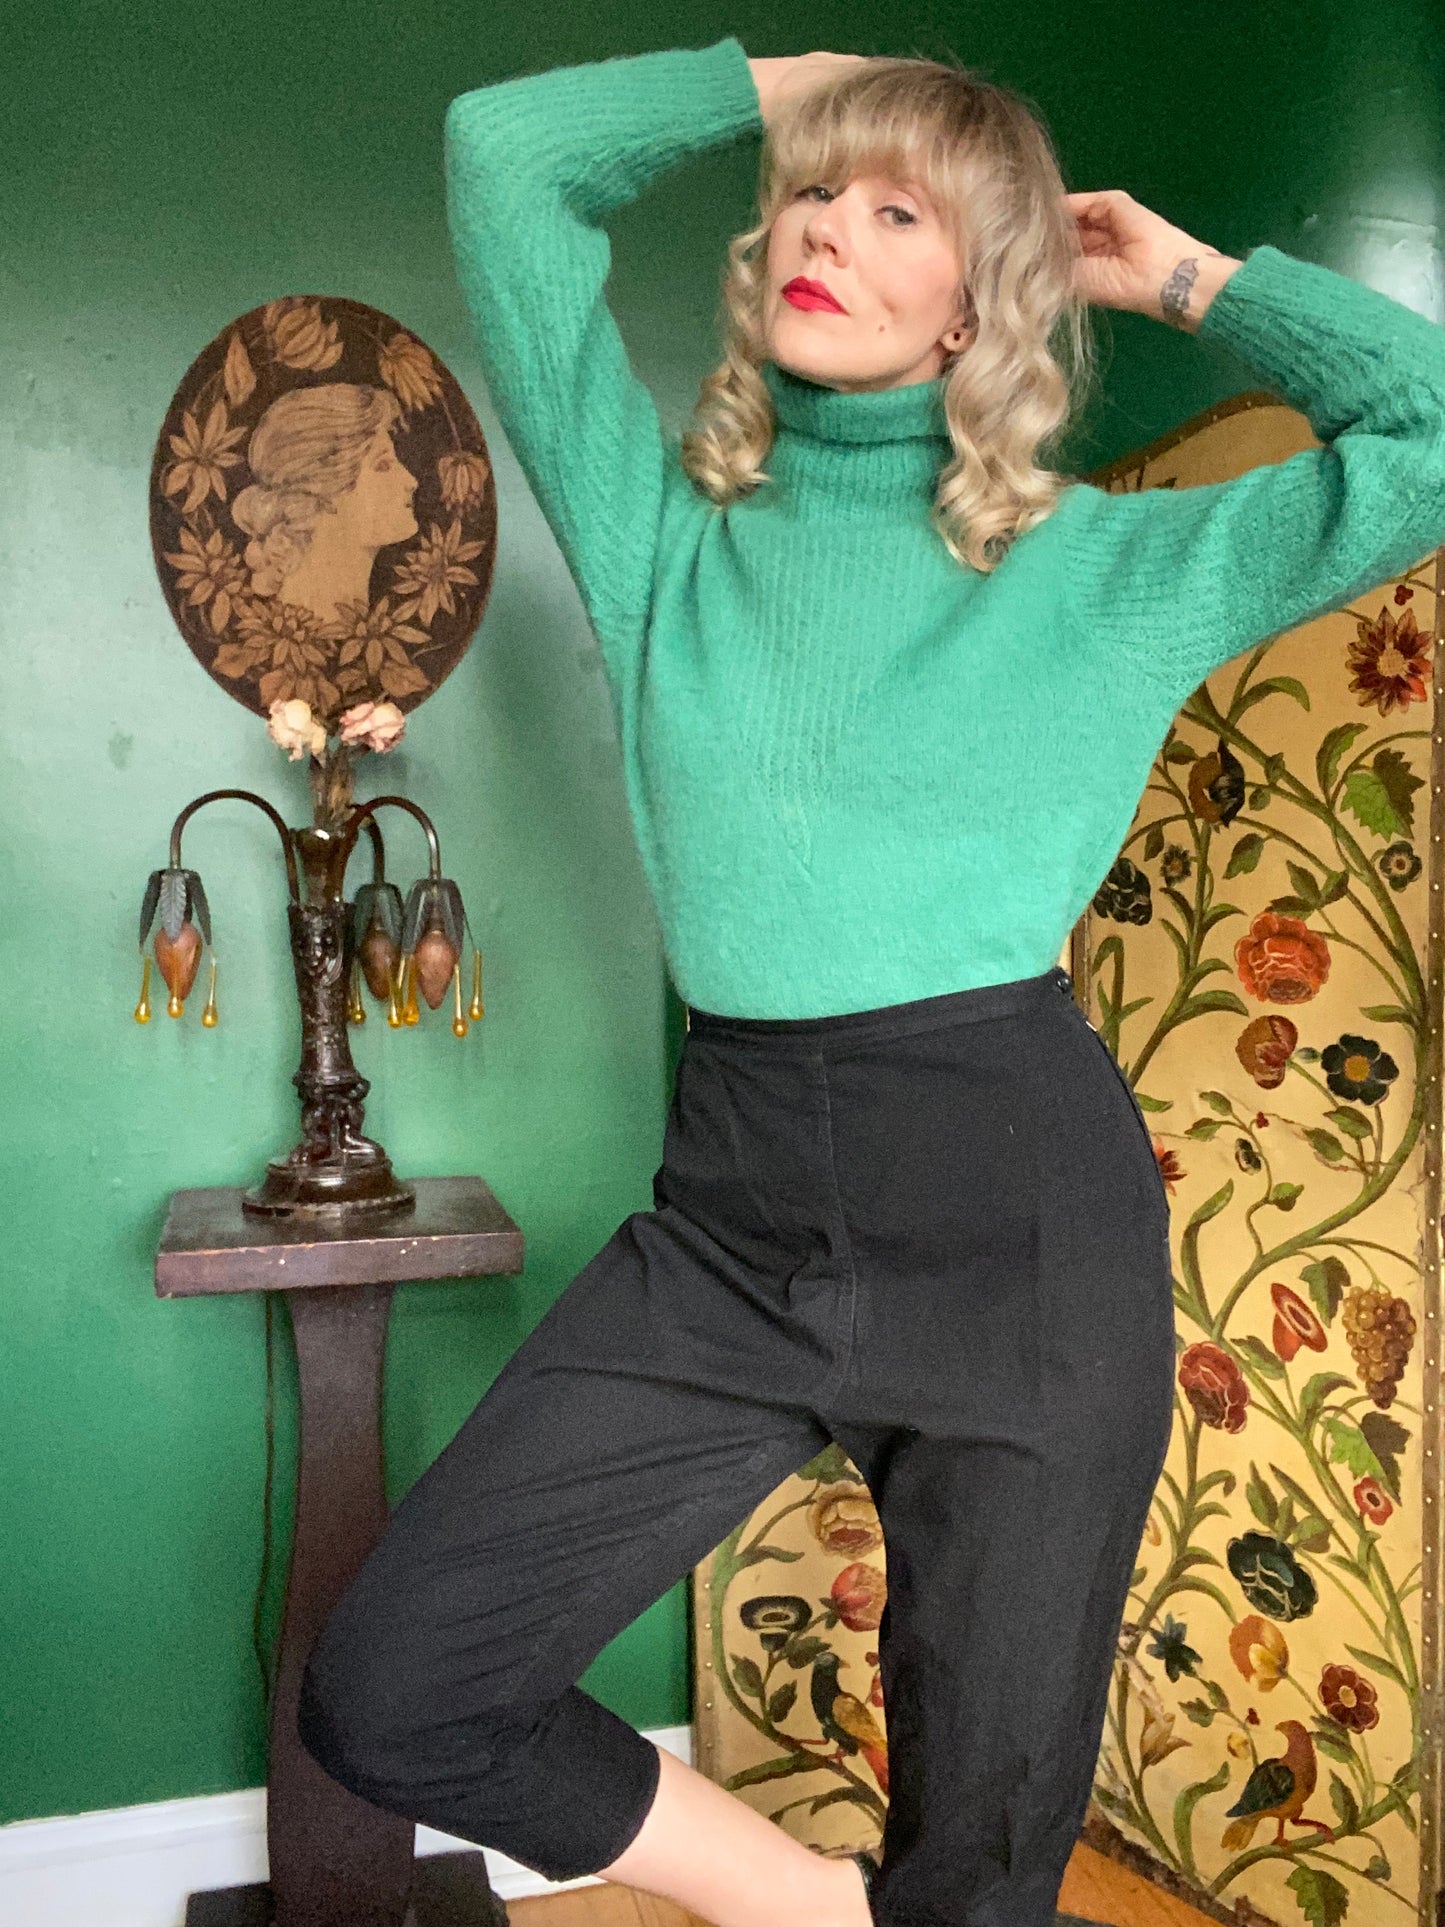 1960s Green Mohair Pullover Sweater